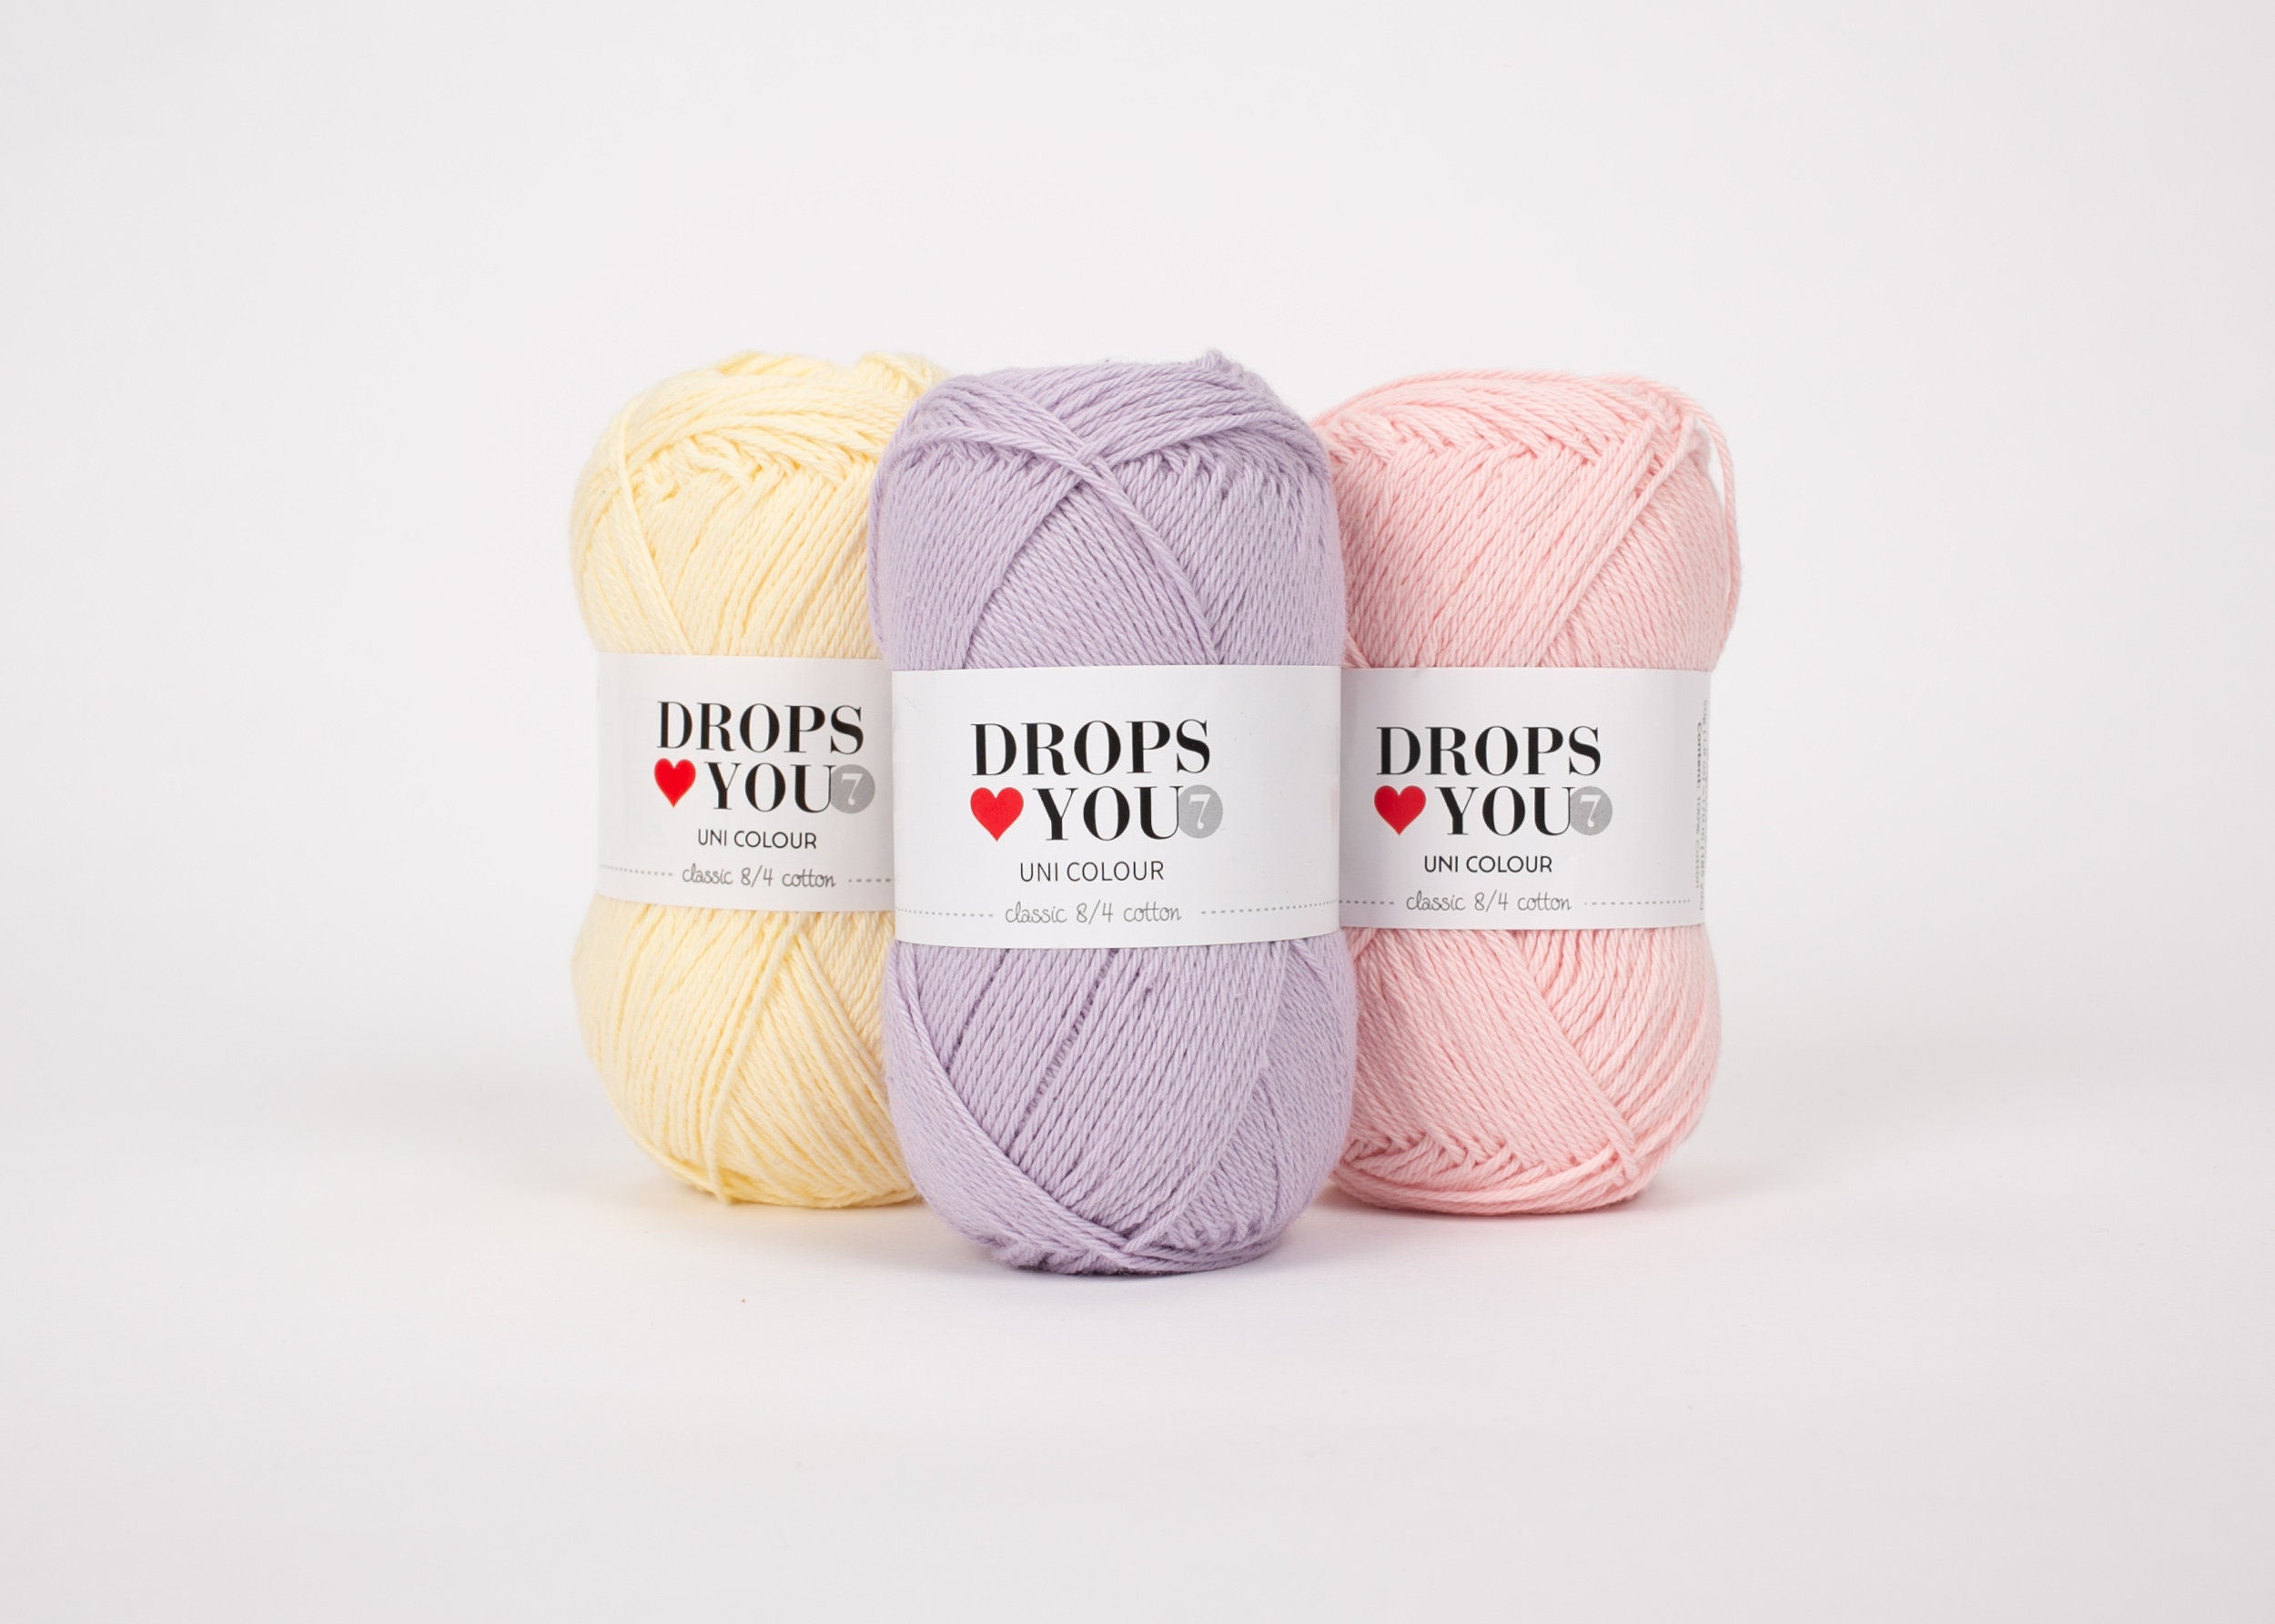 Choosing the right Drops cotton yarn made easy✨ Save this for your next  project bestie💖 Drops Safran, Muskat & Cotton Light Yarns…